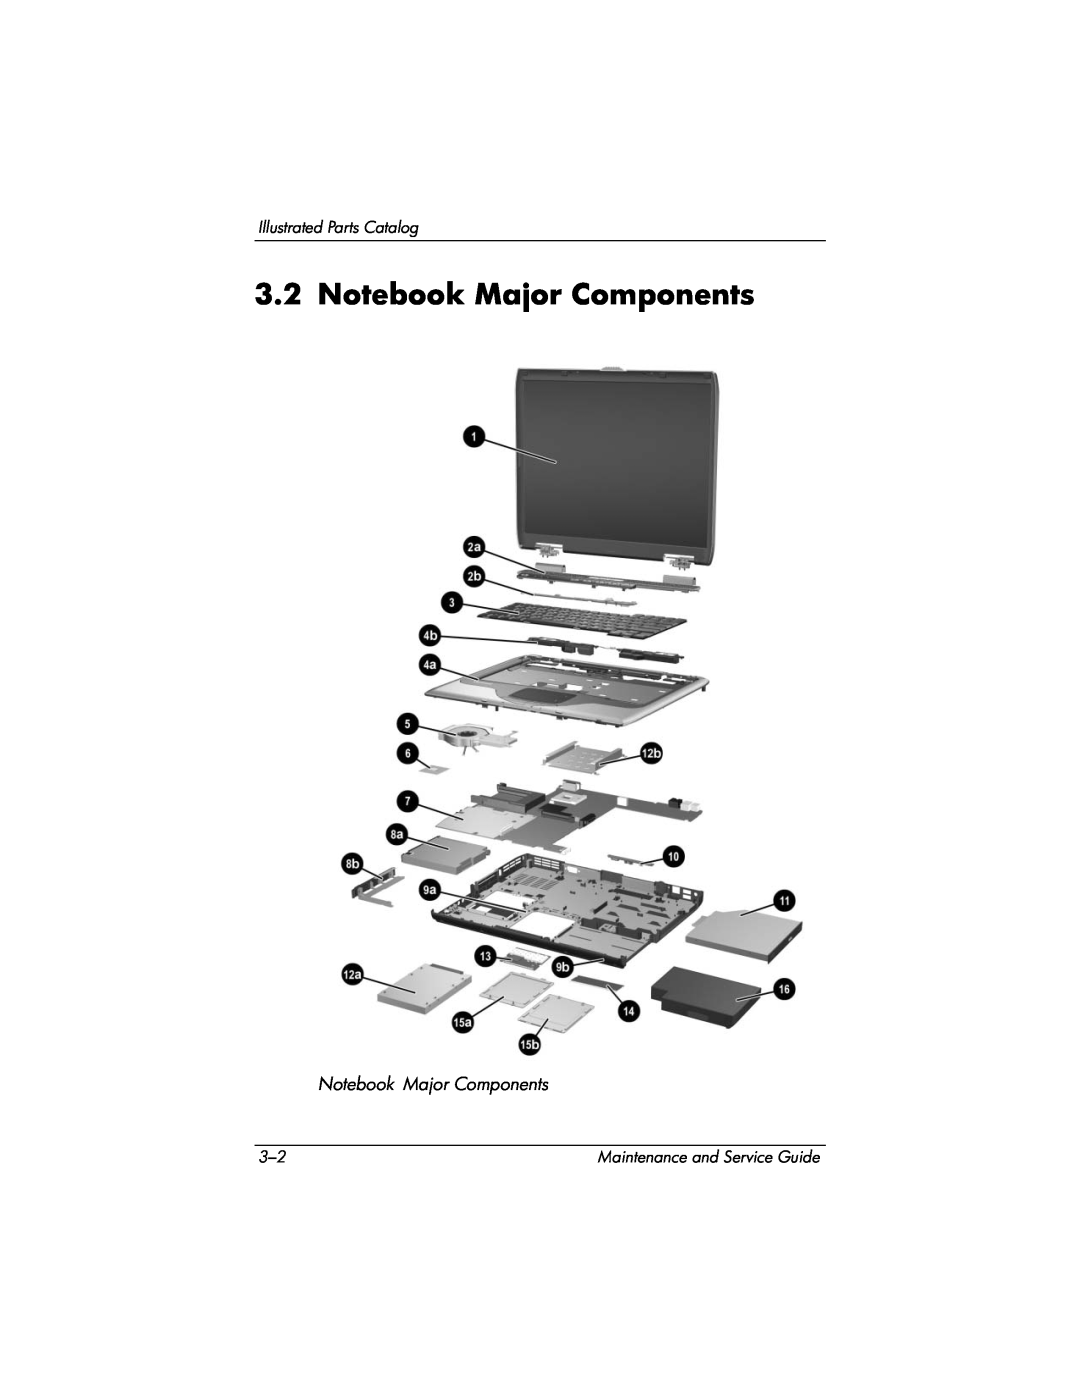 HP NX9040, NX9030, NX9020, ZE4900 manual Notebook Major Components, Illustrated Parts Catalog, Maintenance and Service Guide 